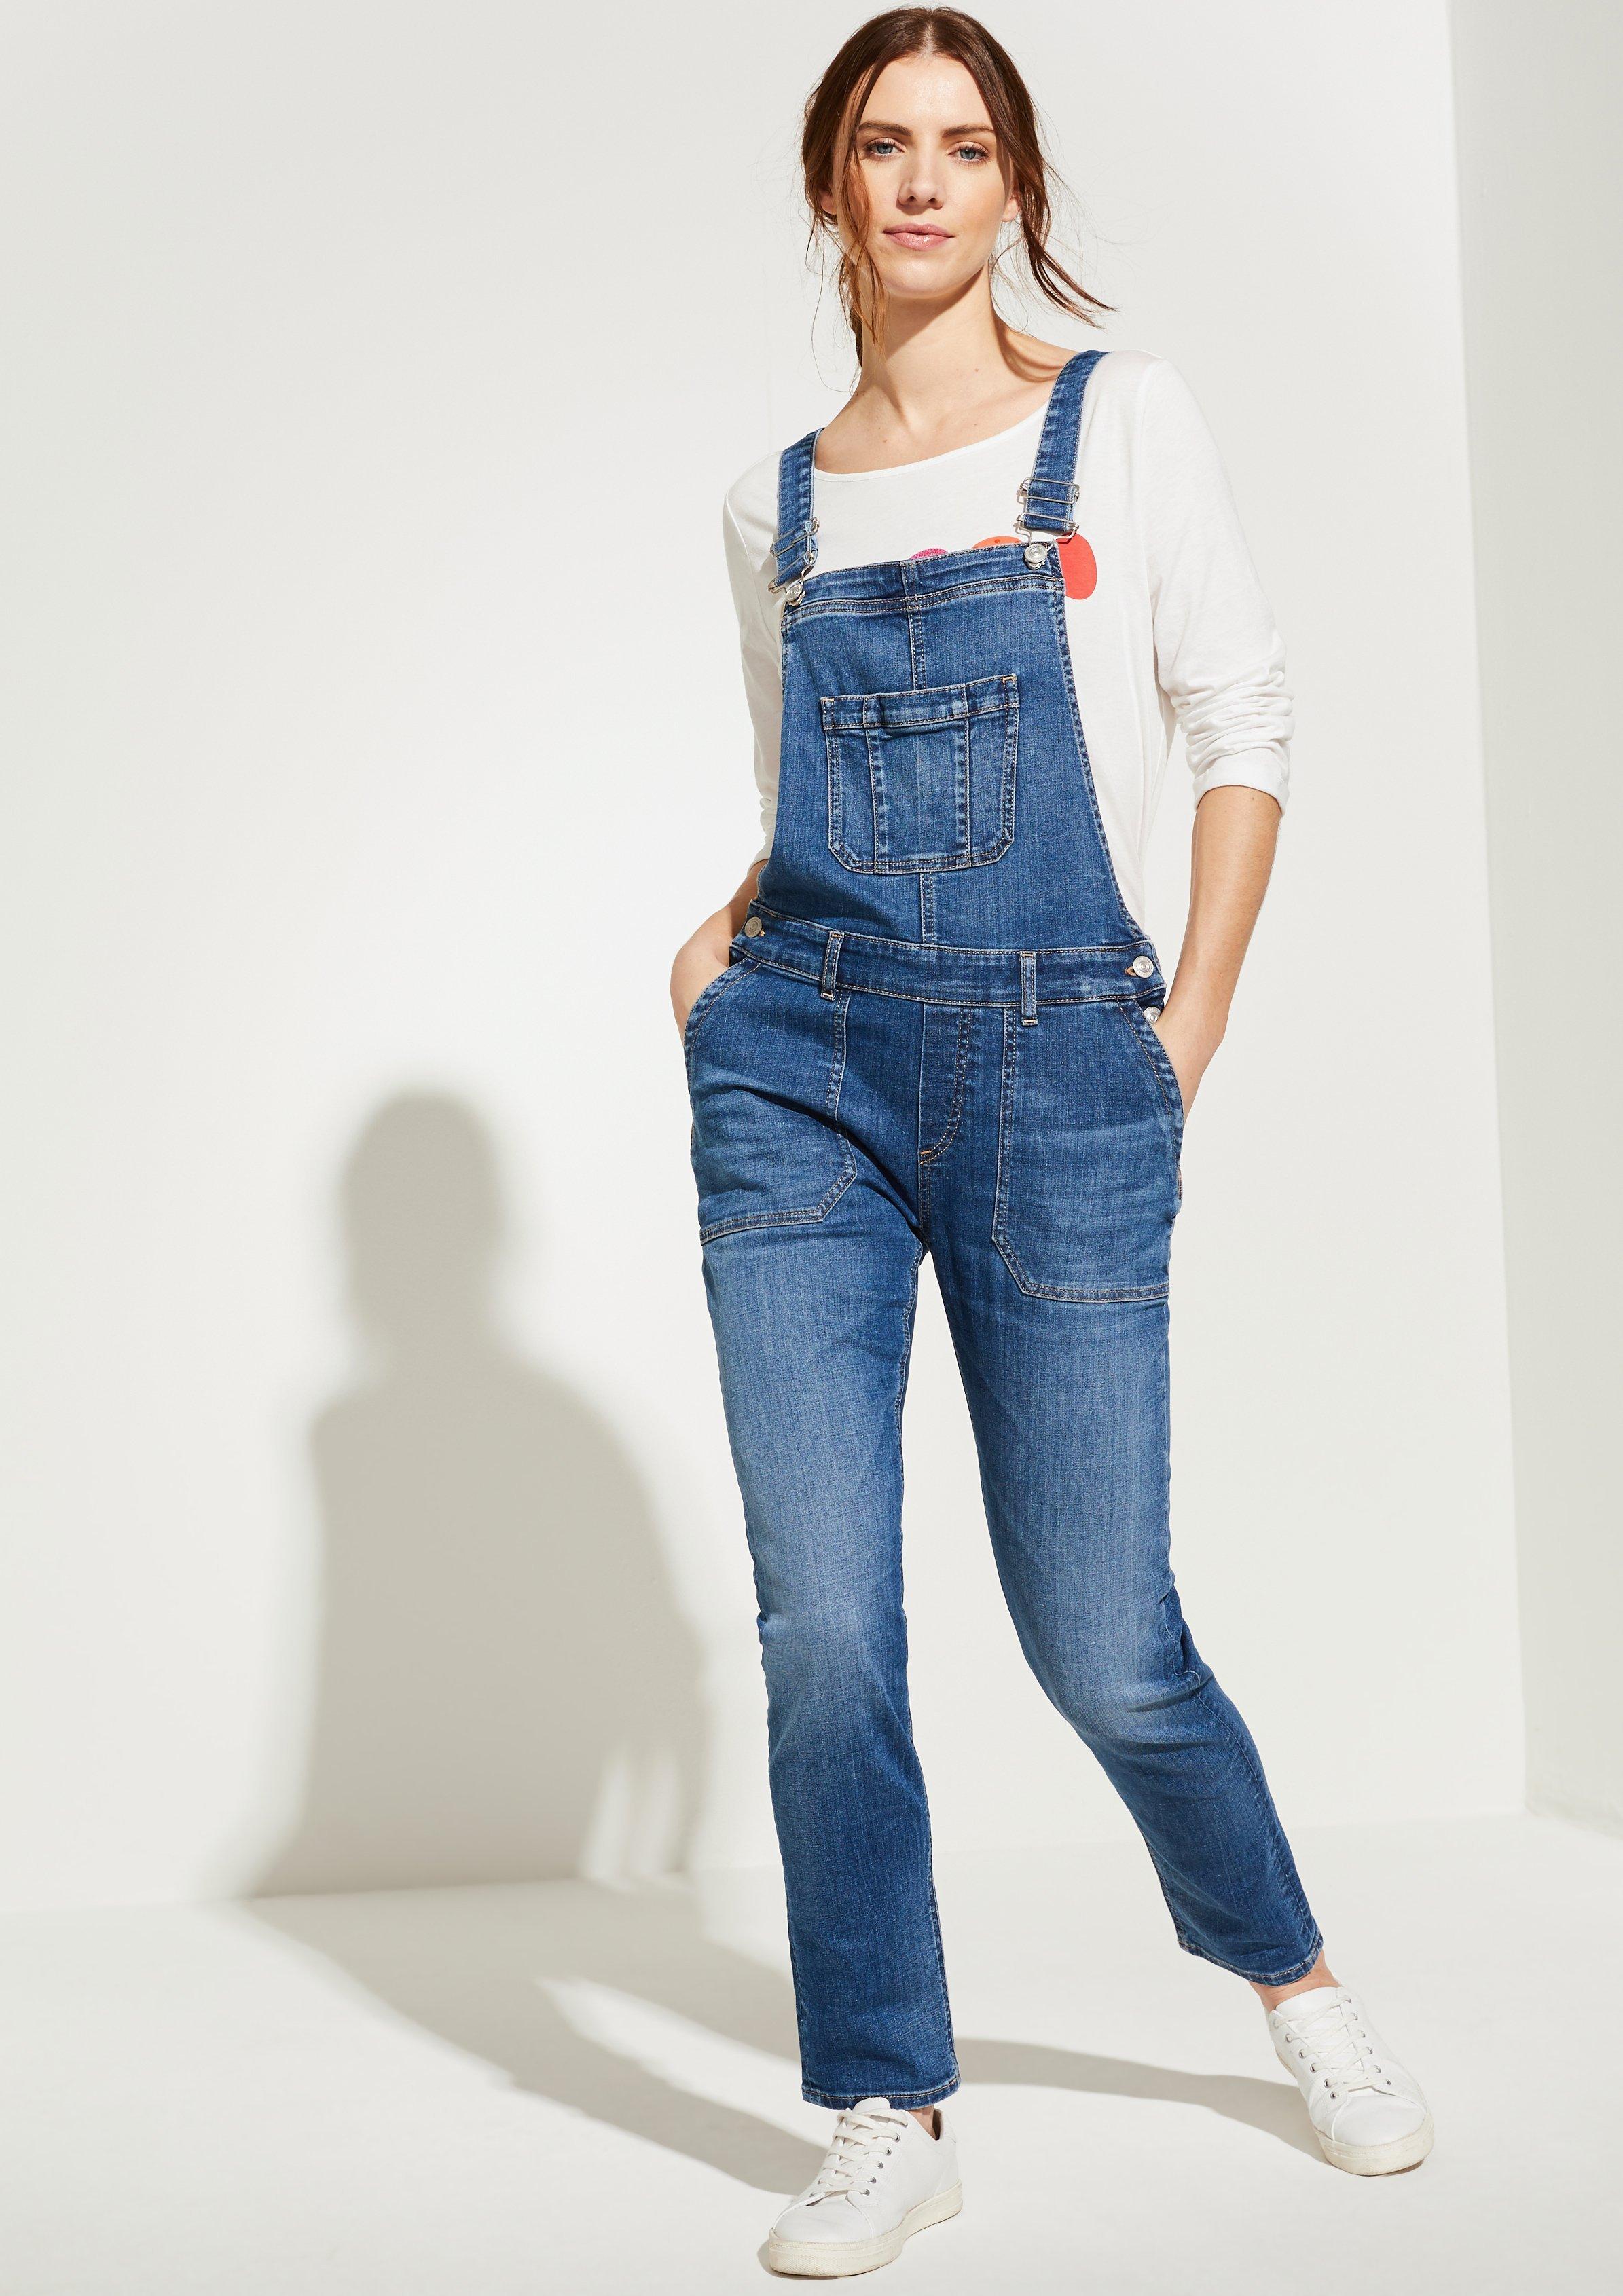 Overalls Jumpsuits For Women Comma Fashion